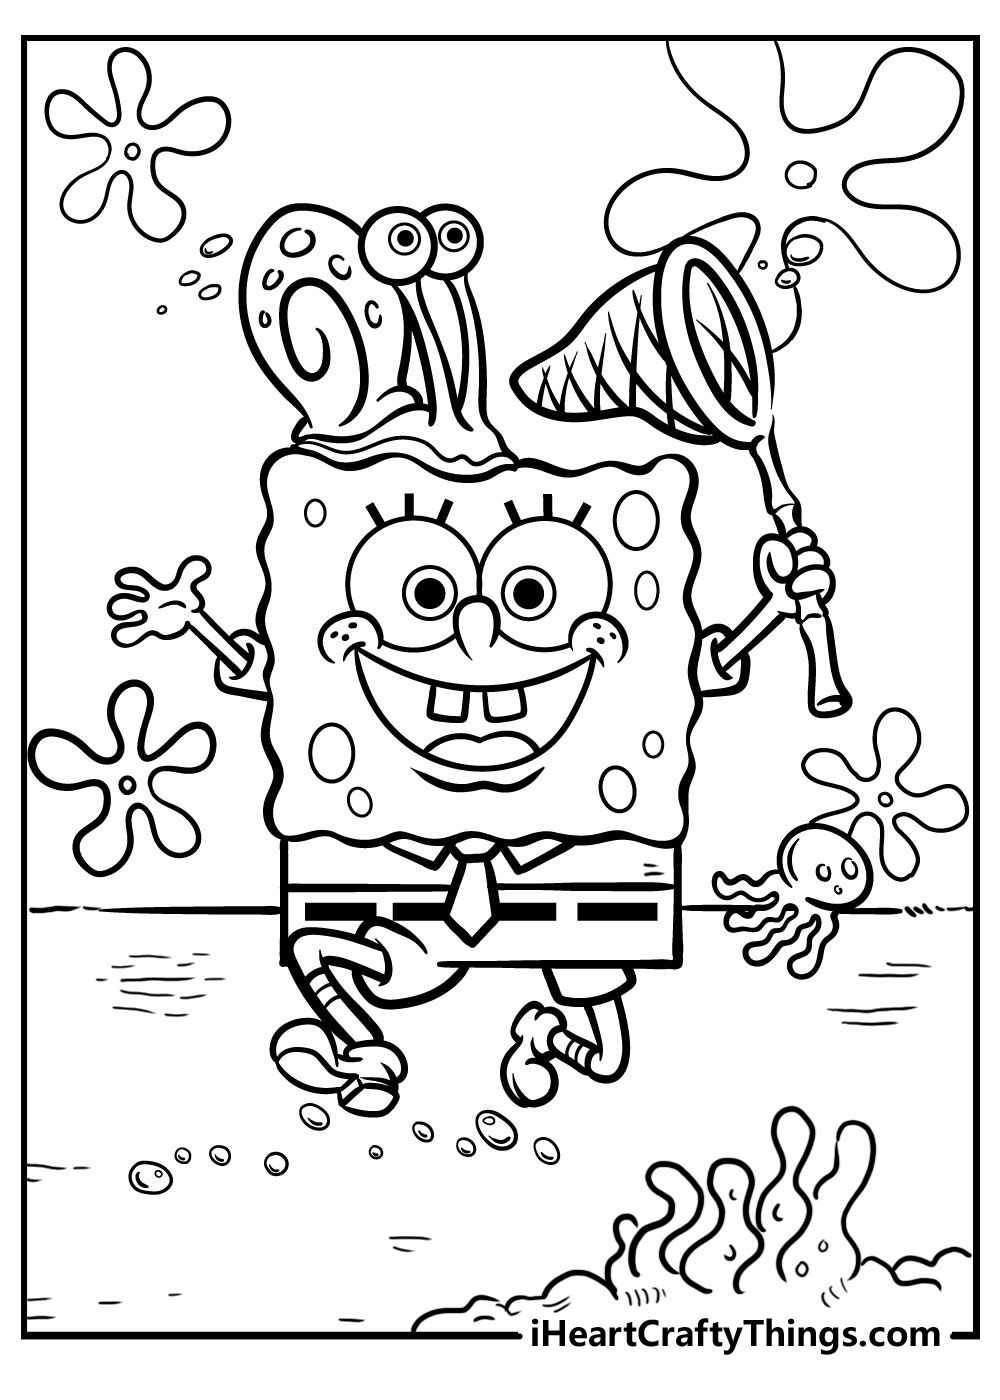 Spongebob Squarepants Coloring Book: Great Coloring Book For Kids Relaxing  And Relieving Stress. Providing Lots Of Designs Of Spongebob (Paperback)